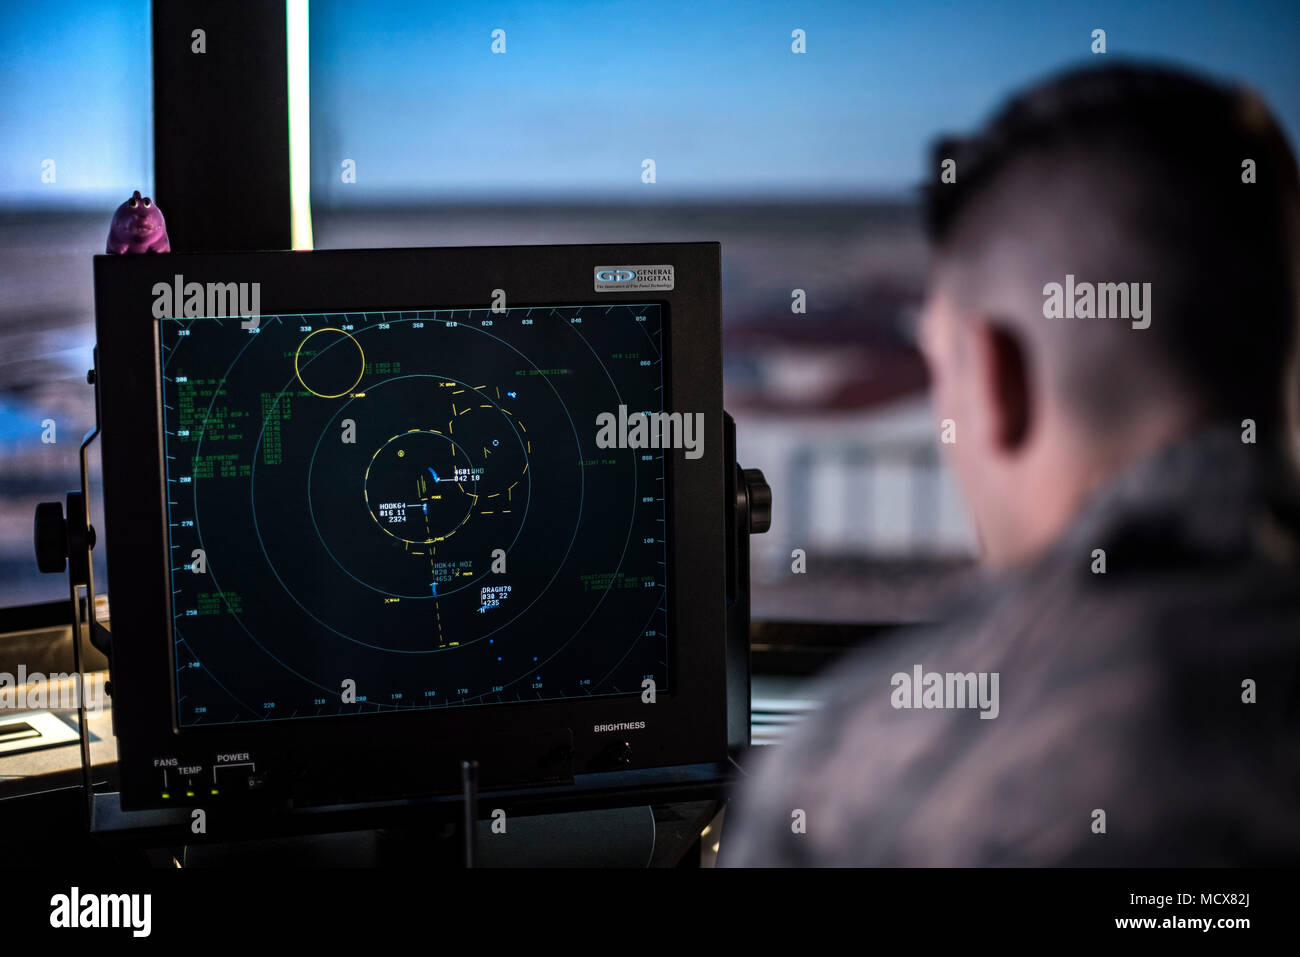 SSgt Chase Kelly, an air traffic controller, monitors airspace from the Inhofe Air Traffic Control Tower, March 1, 2018, at Vance Air Force Base, Okla.  One of only four bases in the Air Force that has a primary pilot training mission, Vance averages more flights per hour than many major commercial airfields. (U.S. Air Force photo by Airman Zachary Heal) Stock Photo